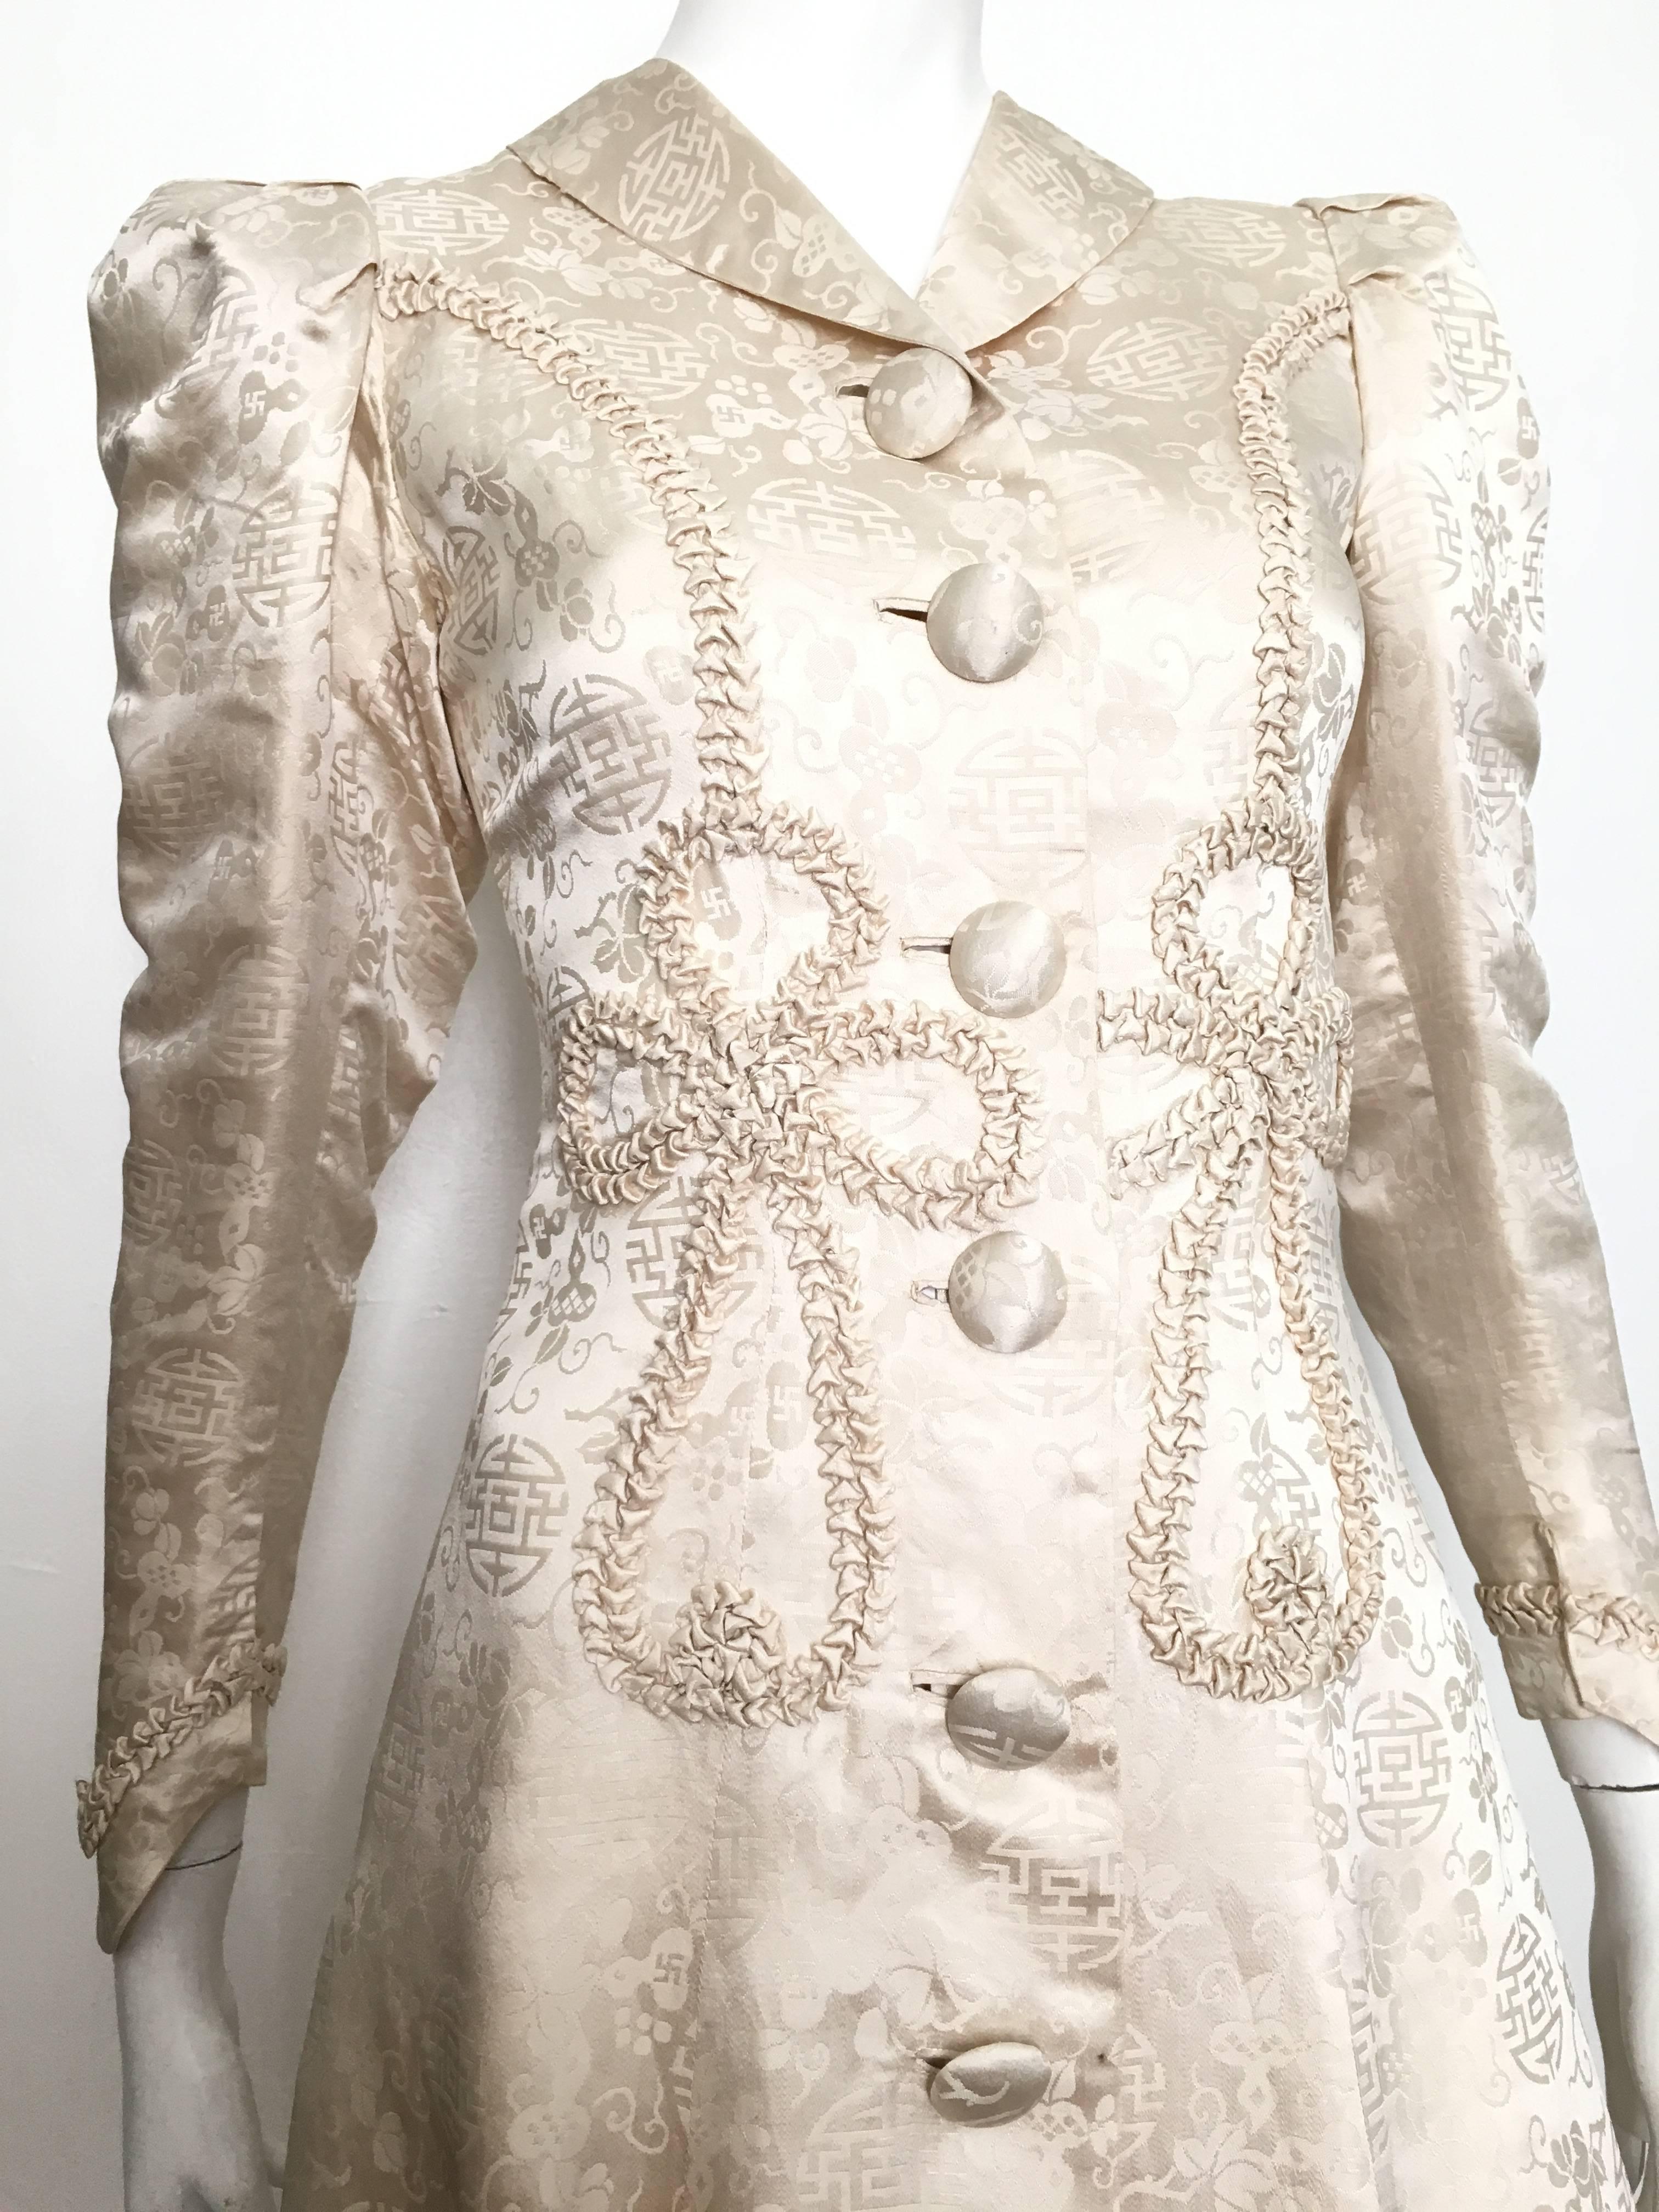 Gorgeous Asian early 1900s floor length silk opera coat is a size 4. 
This fits the size 4 mannequin perfectly with no wiggle room, so if your body is like this mannequin it will fit perfectly. 
The swastika pattern leads me to believe this might